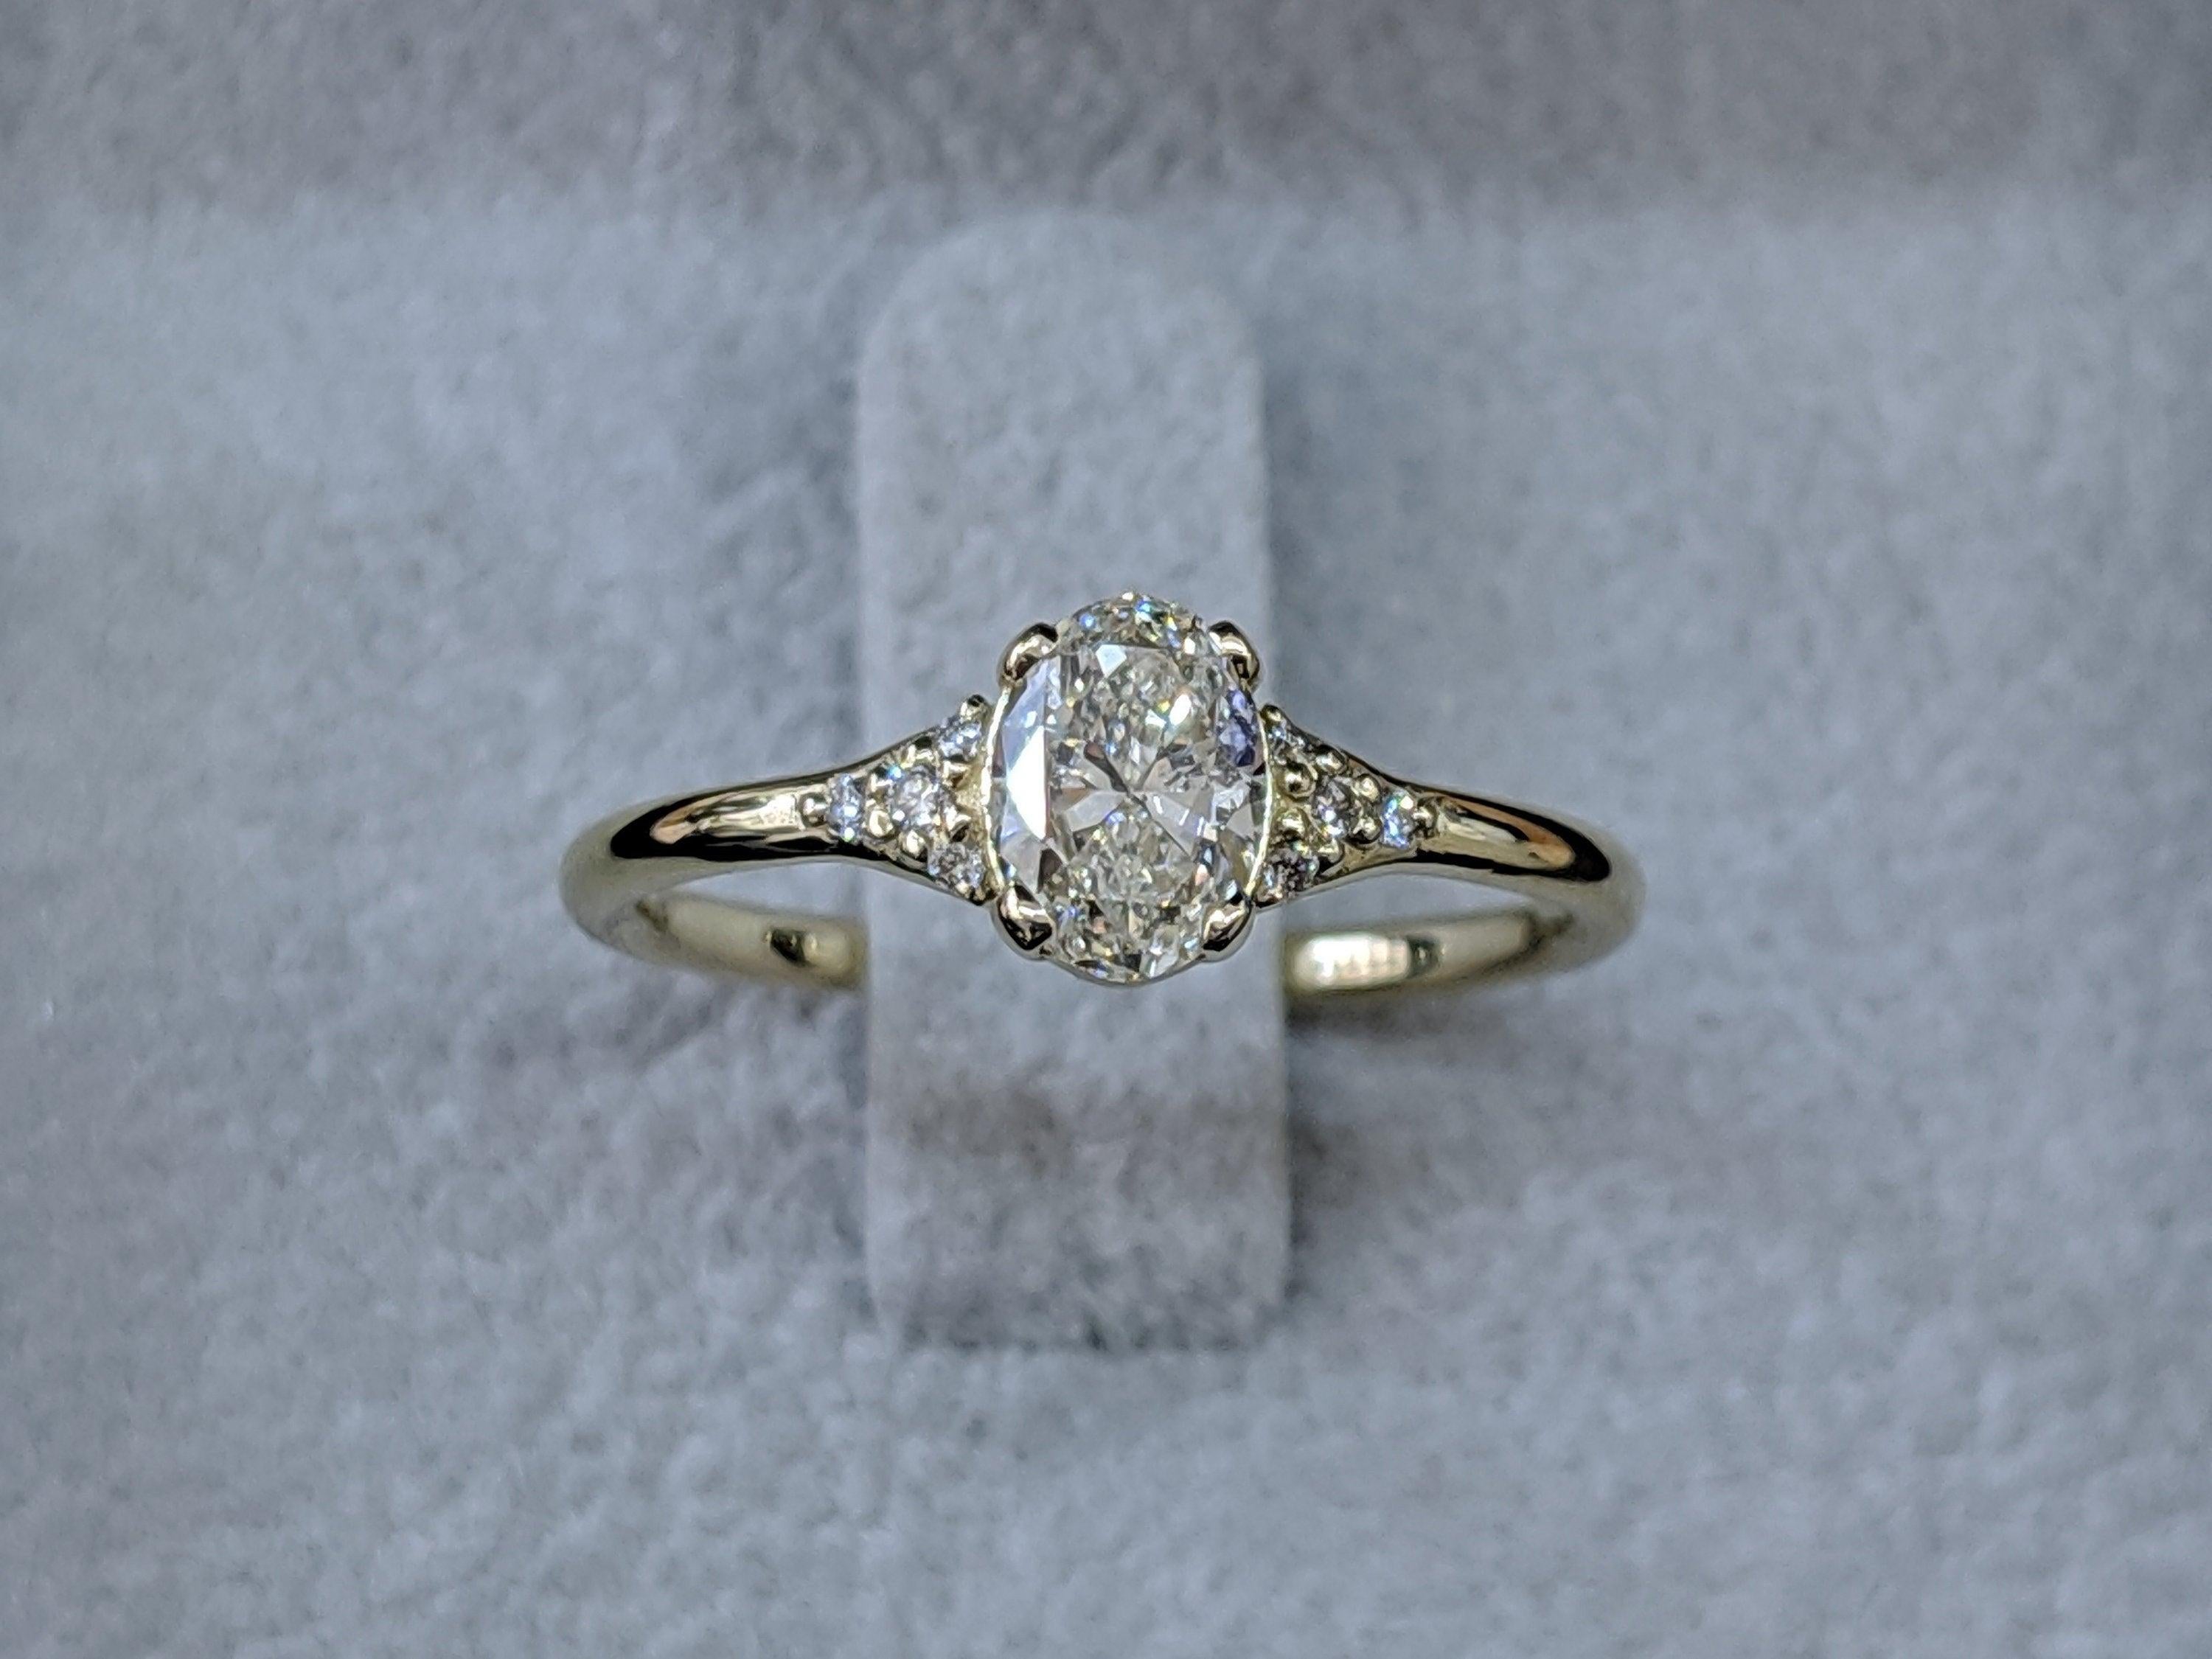 1/2 Carat Diamond Ring, Oval Cut Engagement Ring, Oval Engagement Ring, 14k White Gold, Oval Shape Diamond, Anniversary Ring, Promise Ring
 
 Main Stone Name: Natural Diamond
 Main Stone Weight: 0.40
 Main Stone Clarity: SI1
 Main Stone Color: G
